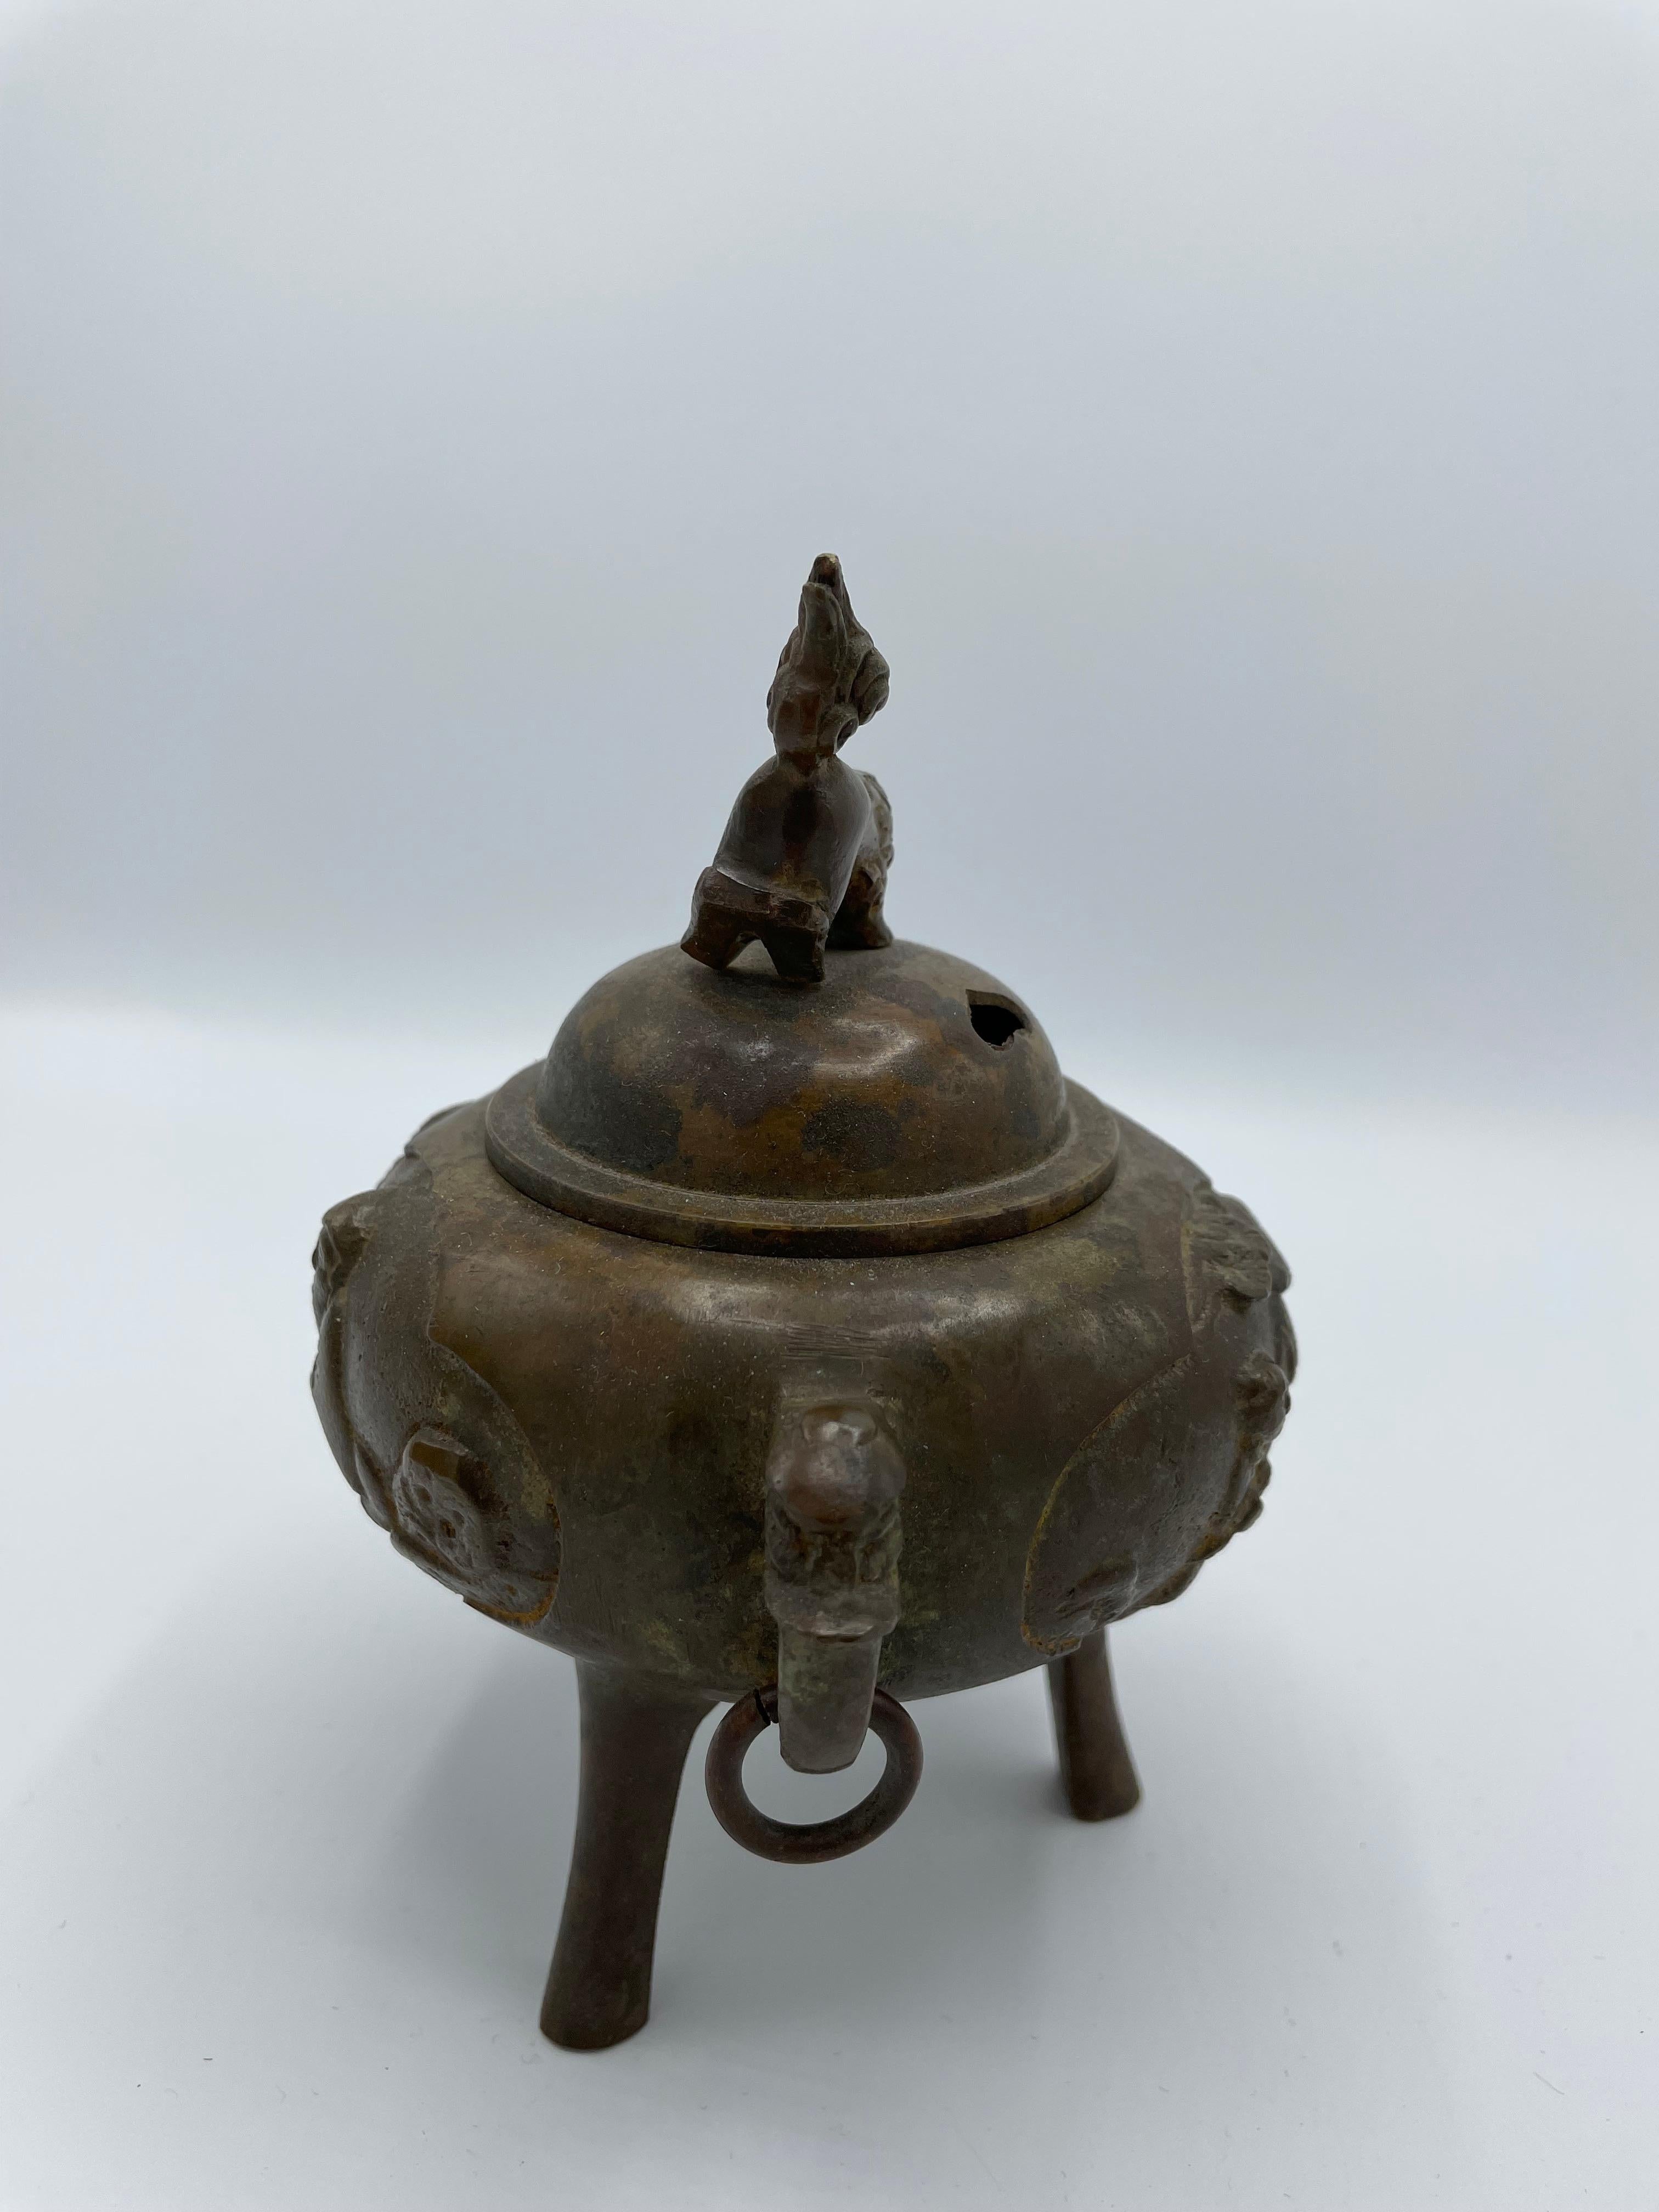 Antique Japanese Incense Burner with Iron in 1920s Taisho Era For Sale 4